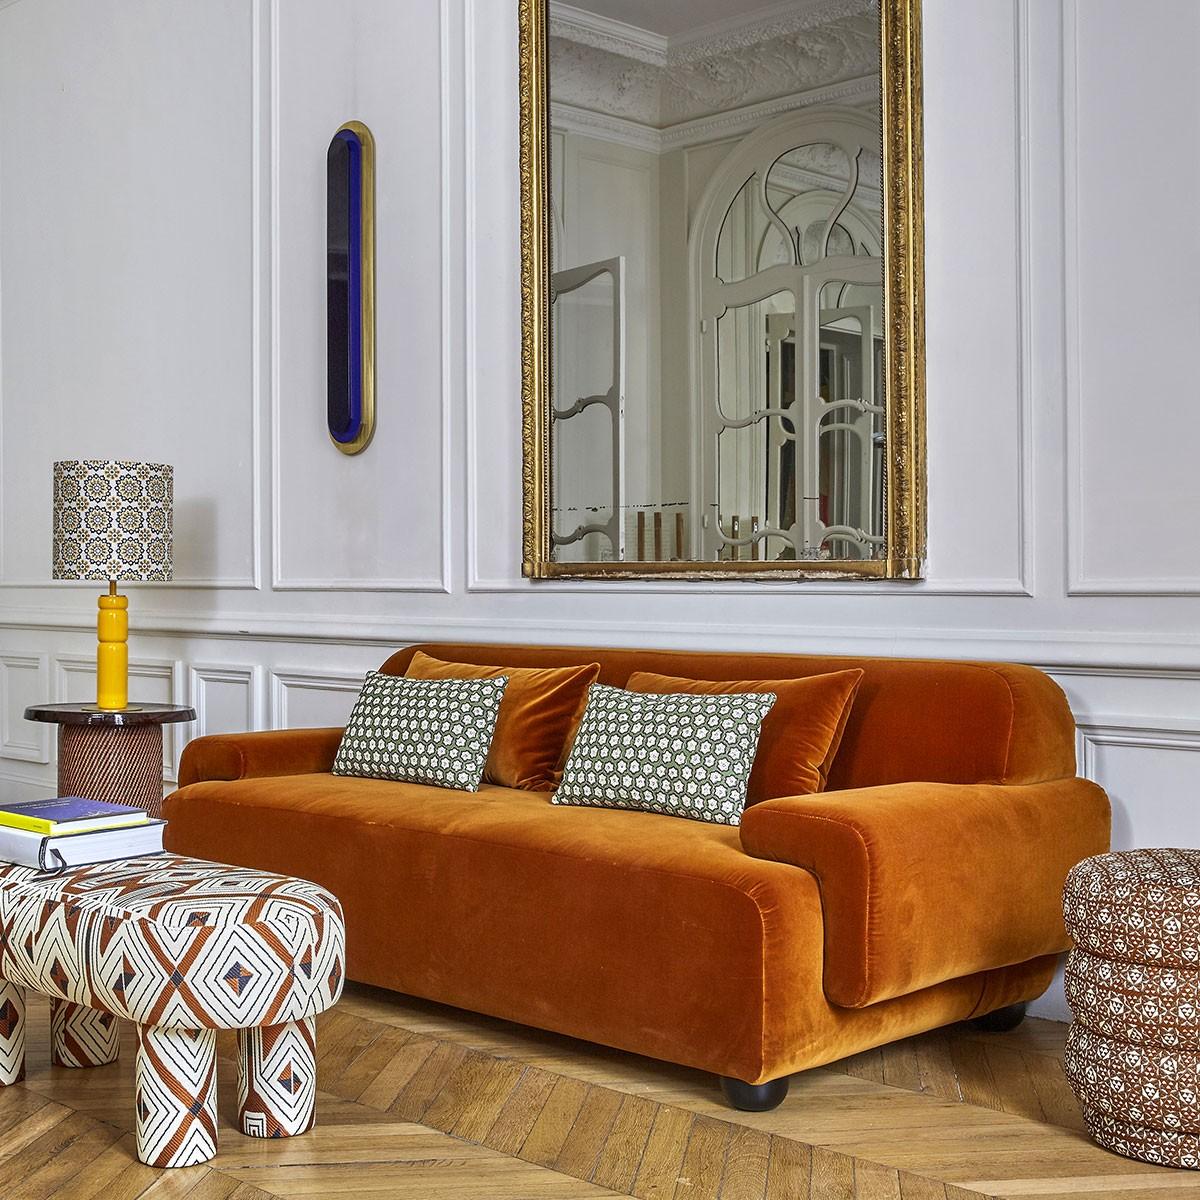 Popus Editions Lena 3-seater sofa in green Como velvet upholstery

It looks like it's straight out of a movie, with its generous curves and wide armrests. It is a real invitation to spend long Sundays with the family, comfortably seated in front